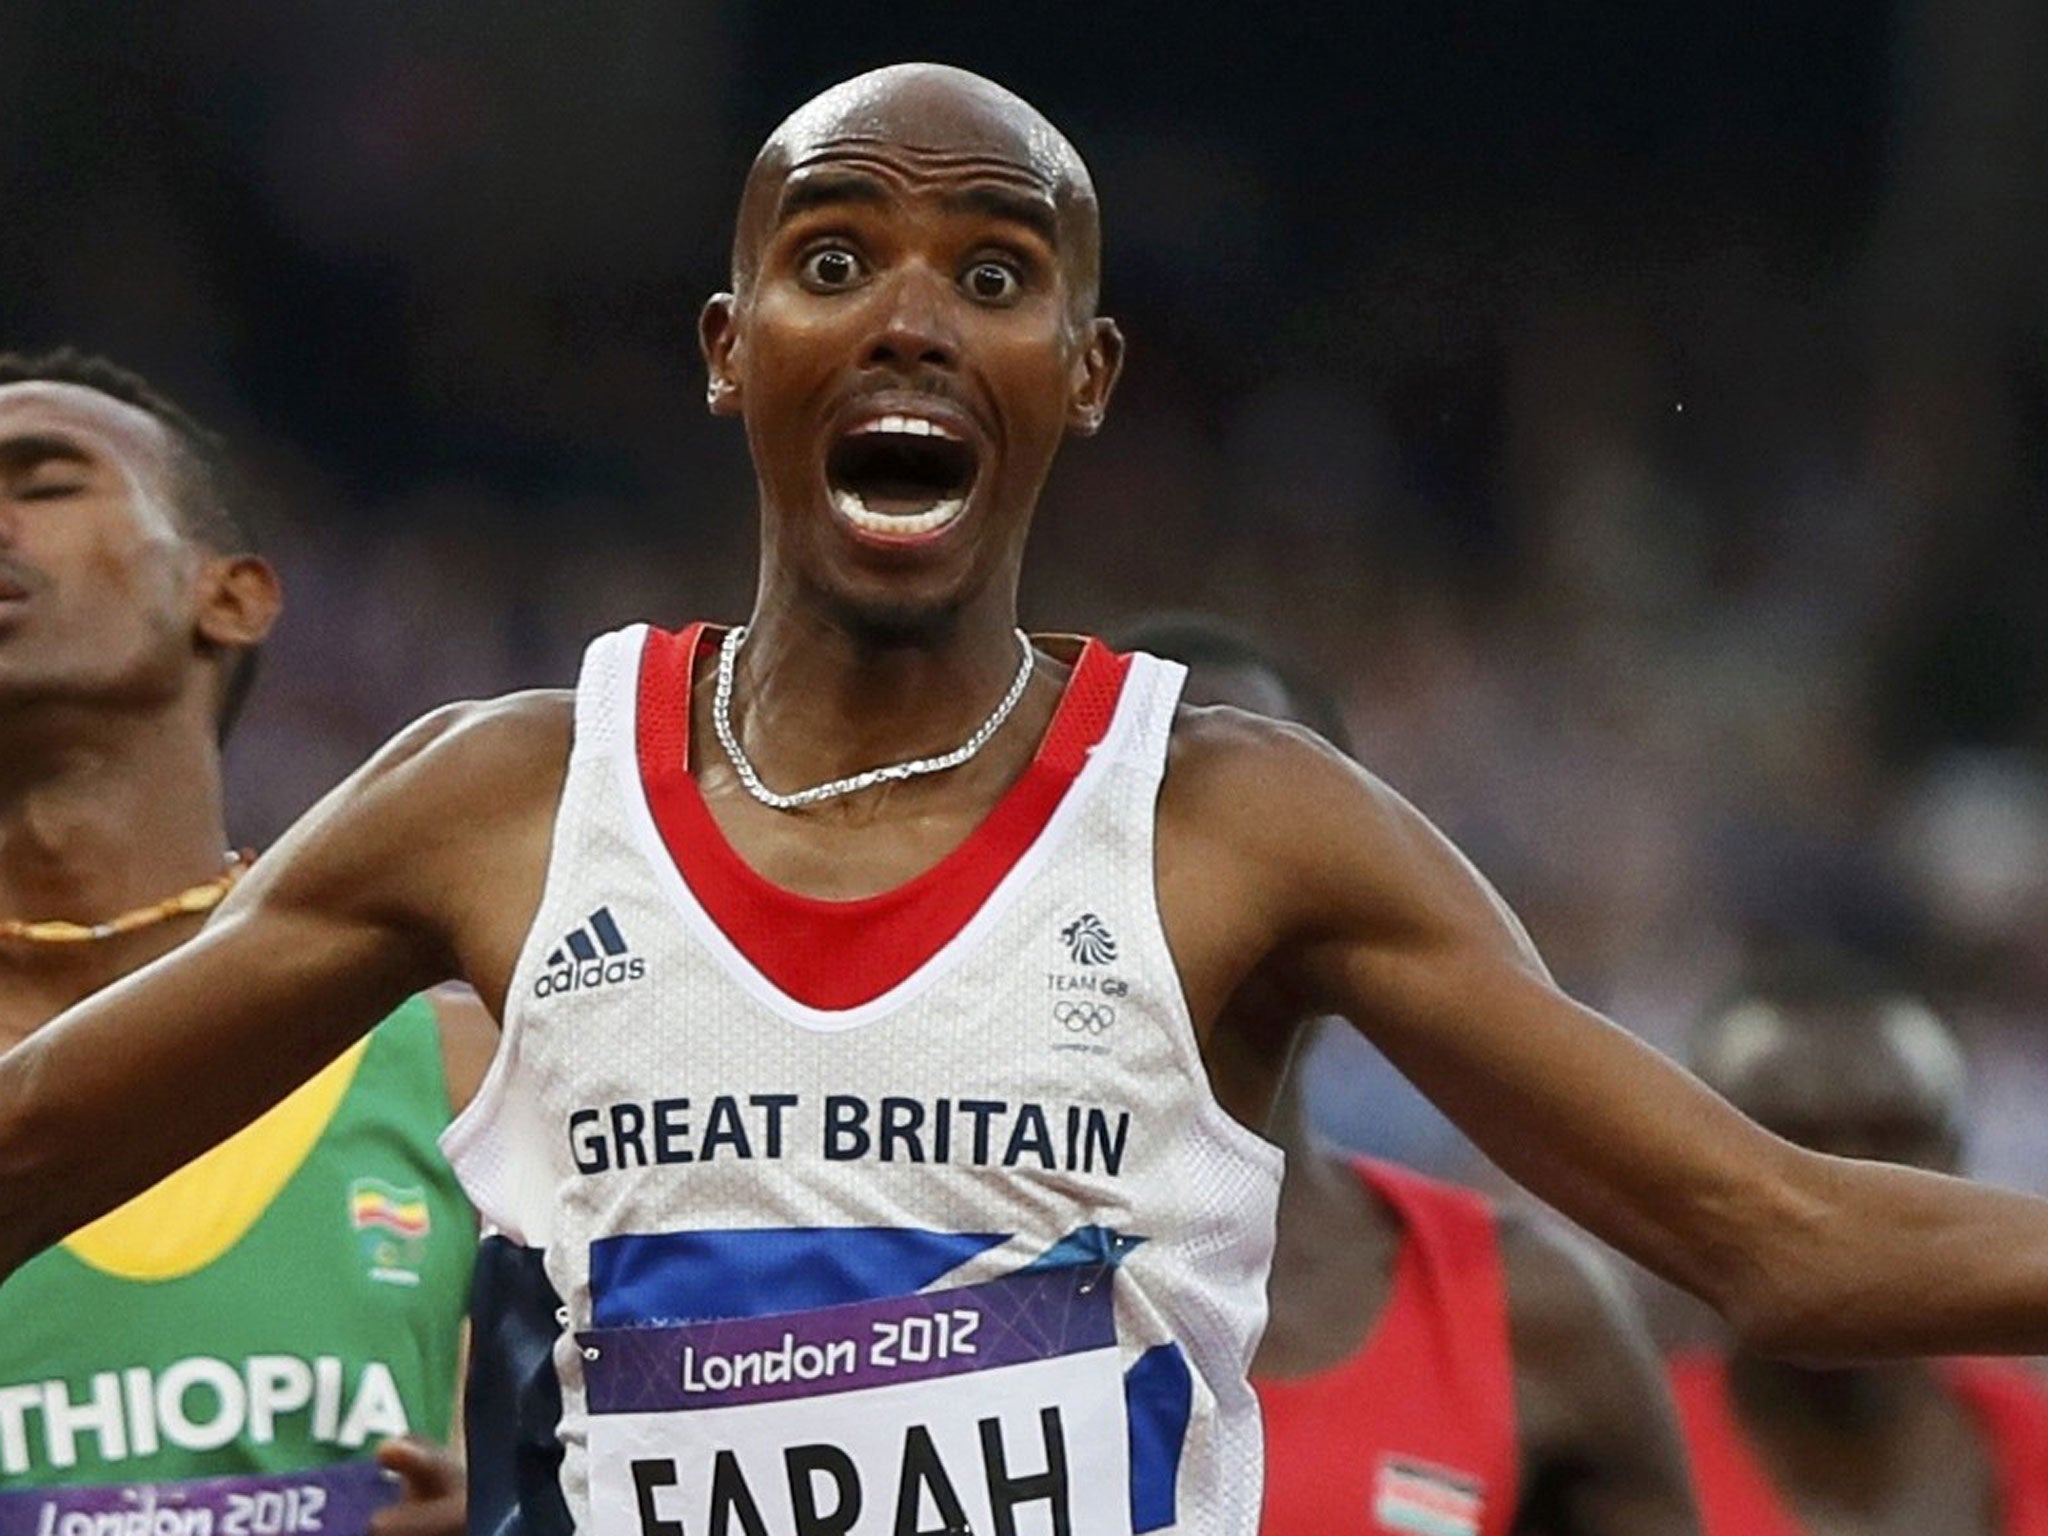 Mo Farah is playing catch-up after taking an extended post-Olympics break: 'I am not in terrible shape but I am behind my training partner'